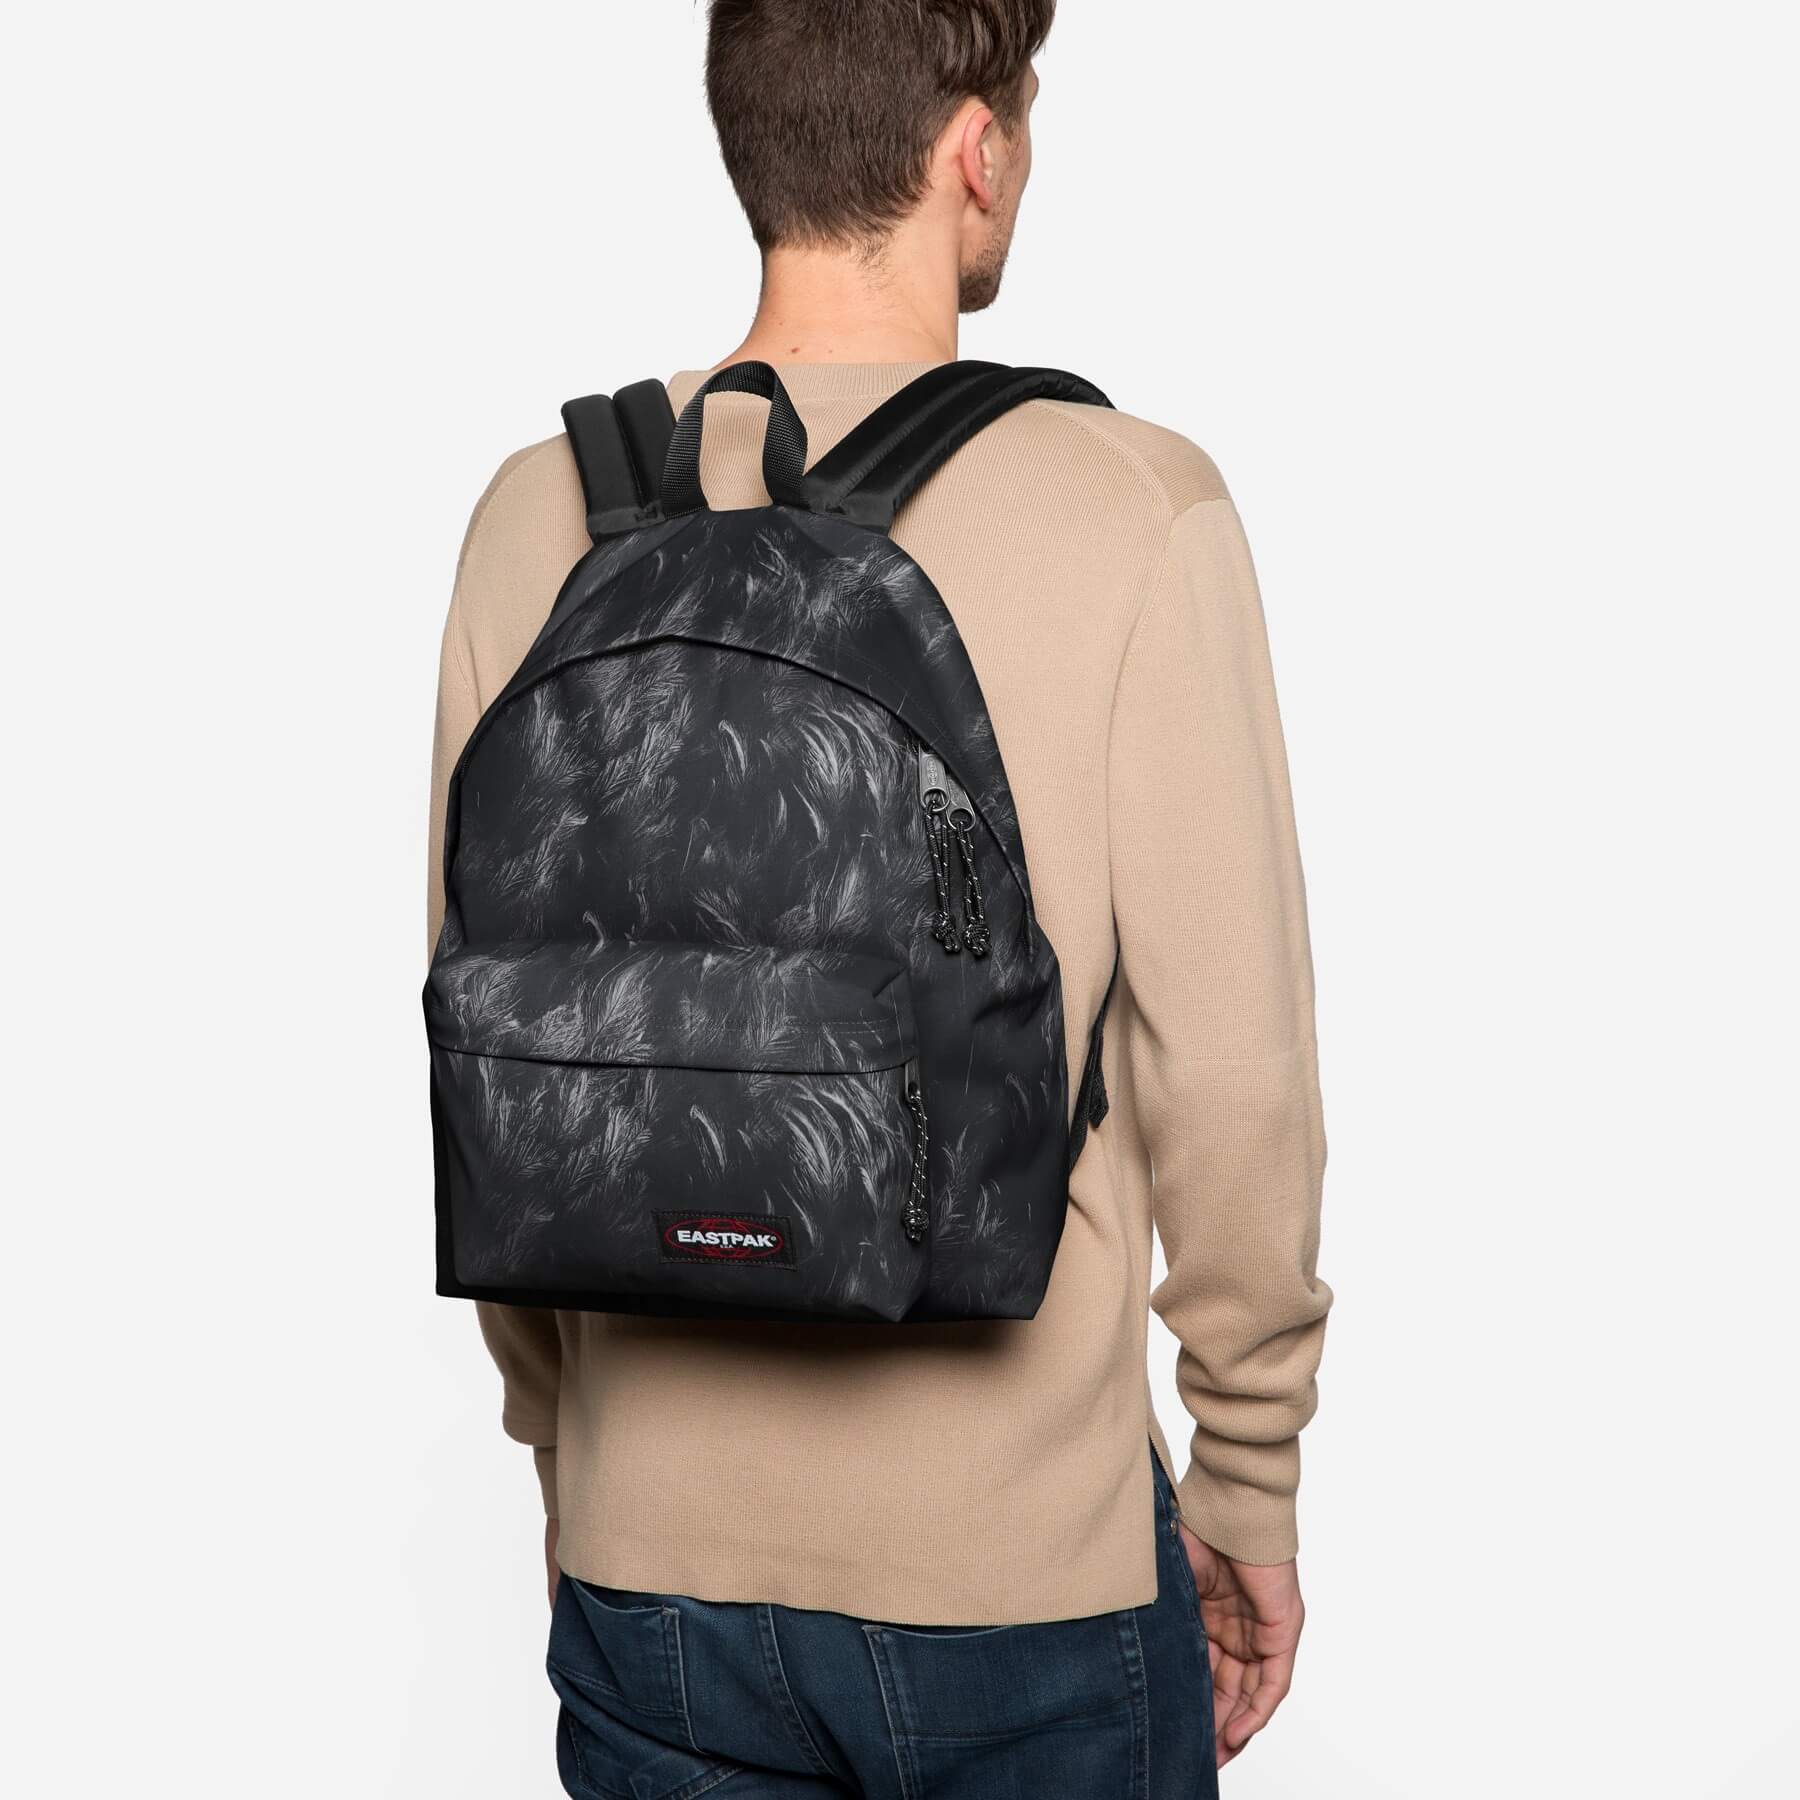 Authentic Backpack